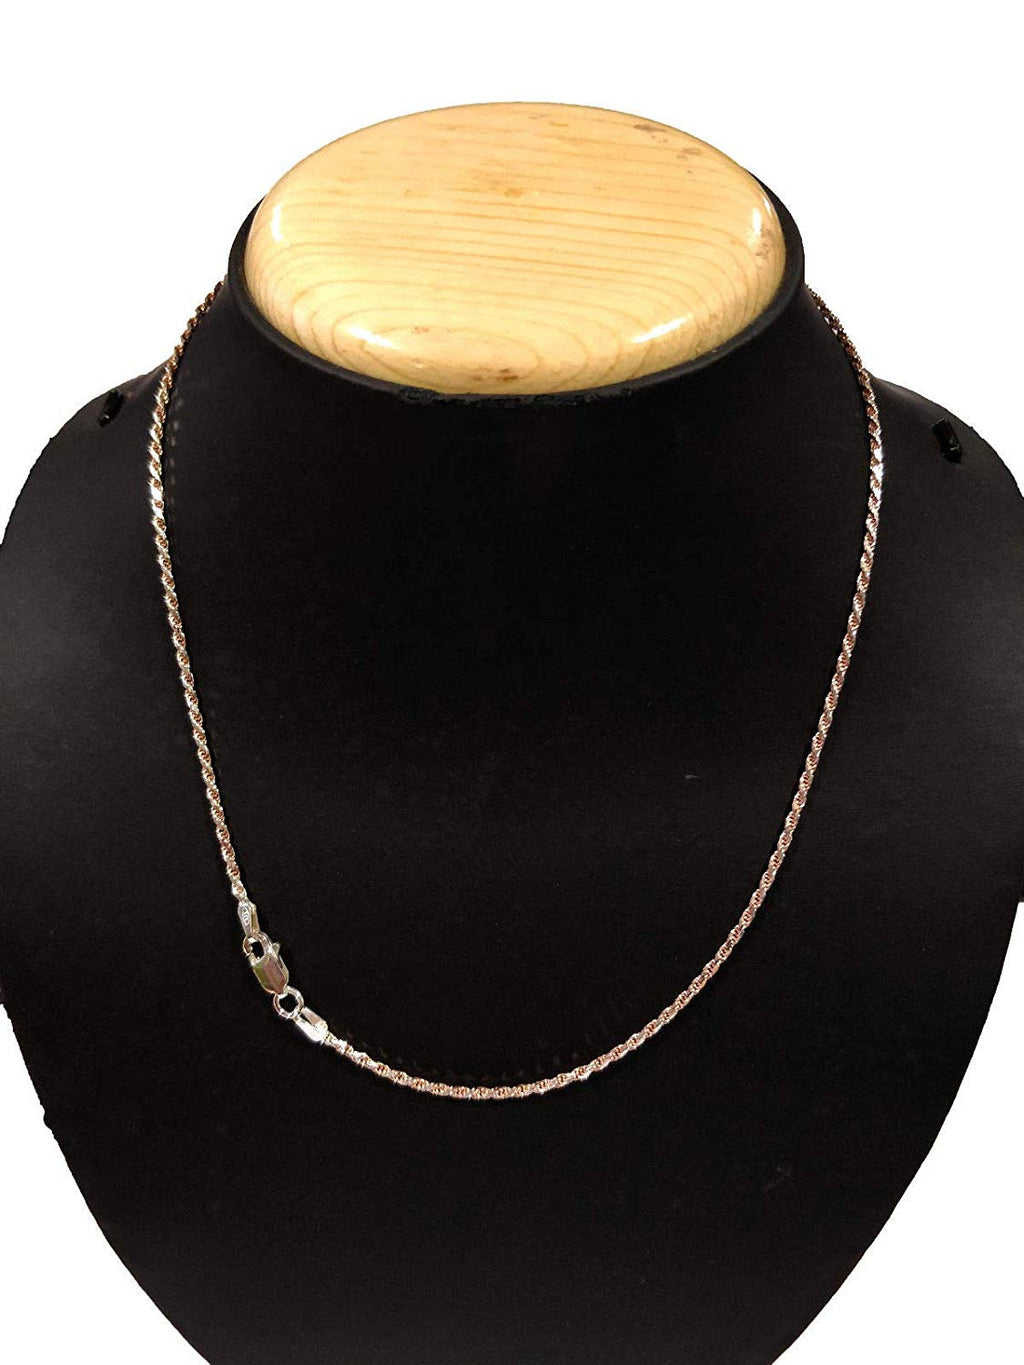 Two Tone Gold Bead Box Chain Station Necklace - Zoran Designs